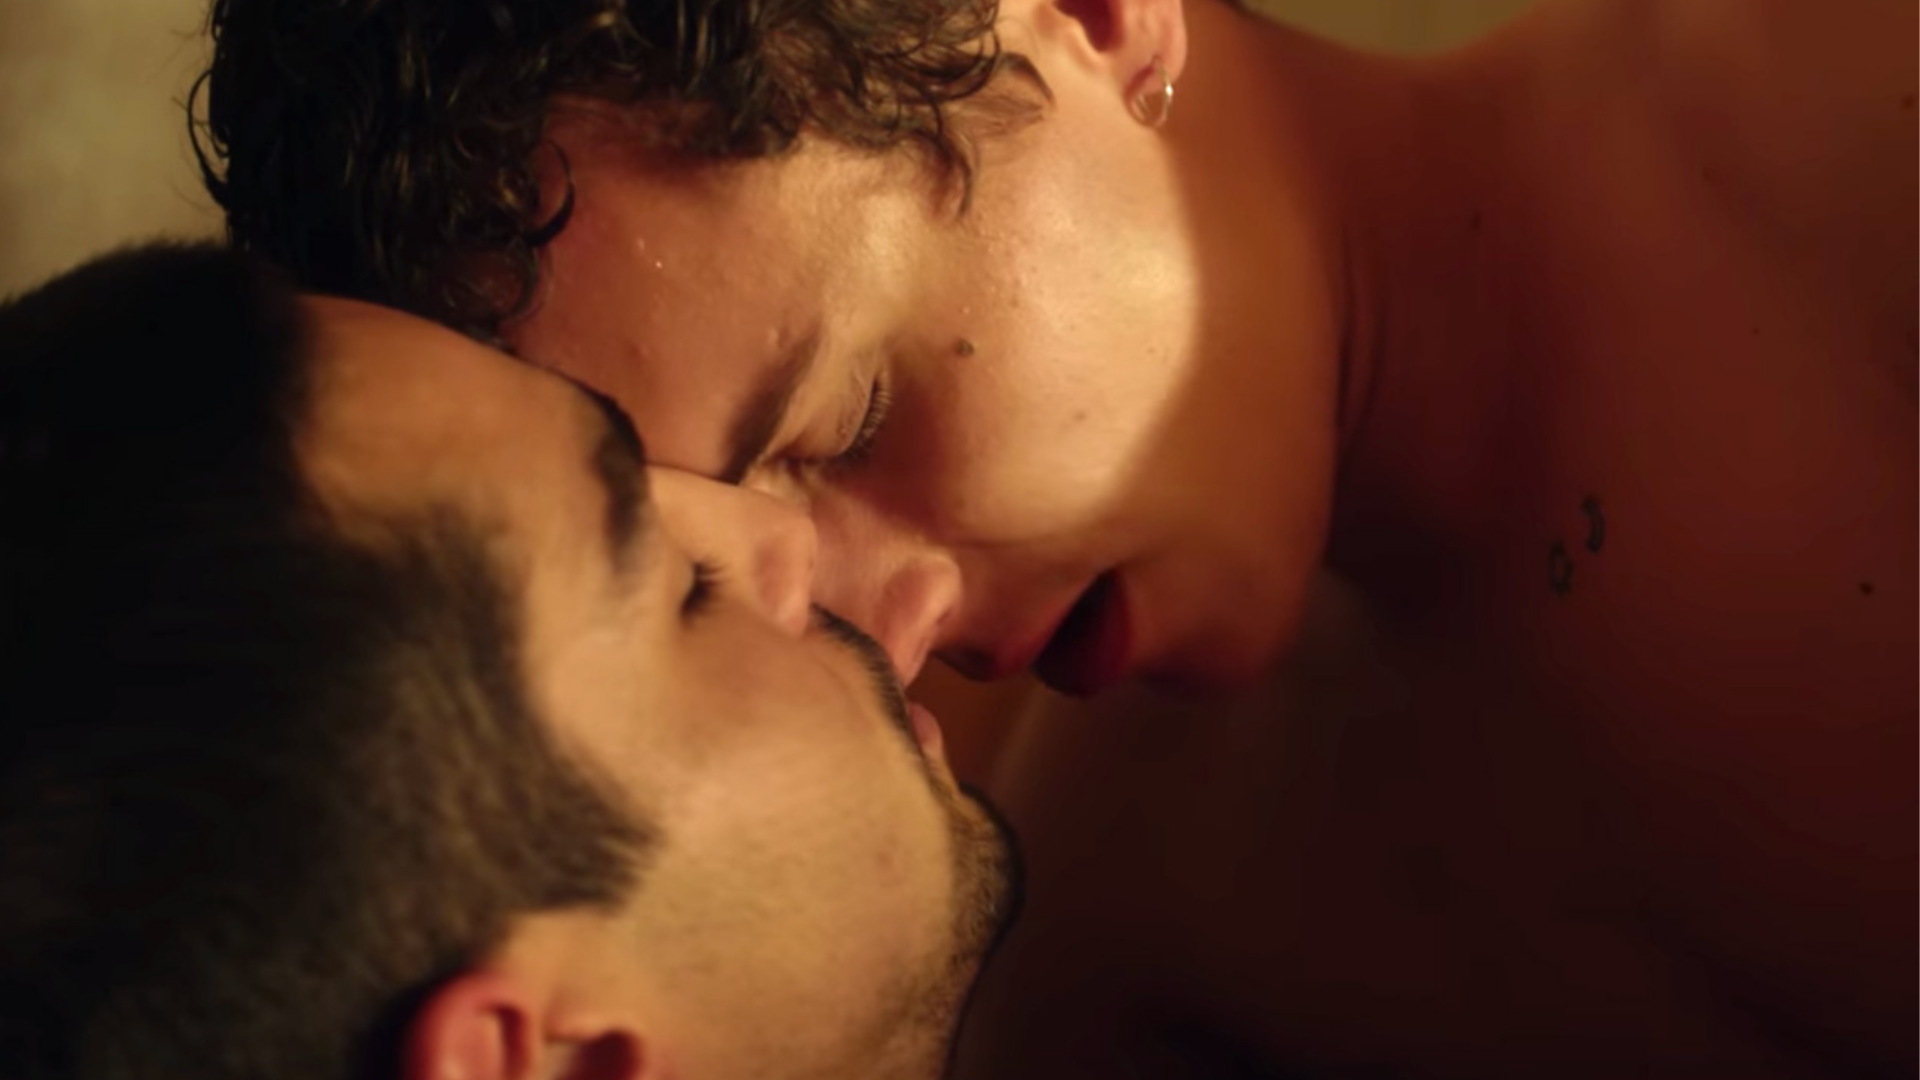 Two men about to get intimate and kiss each other